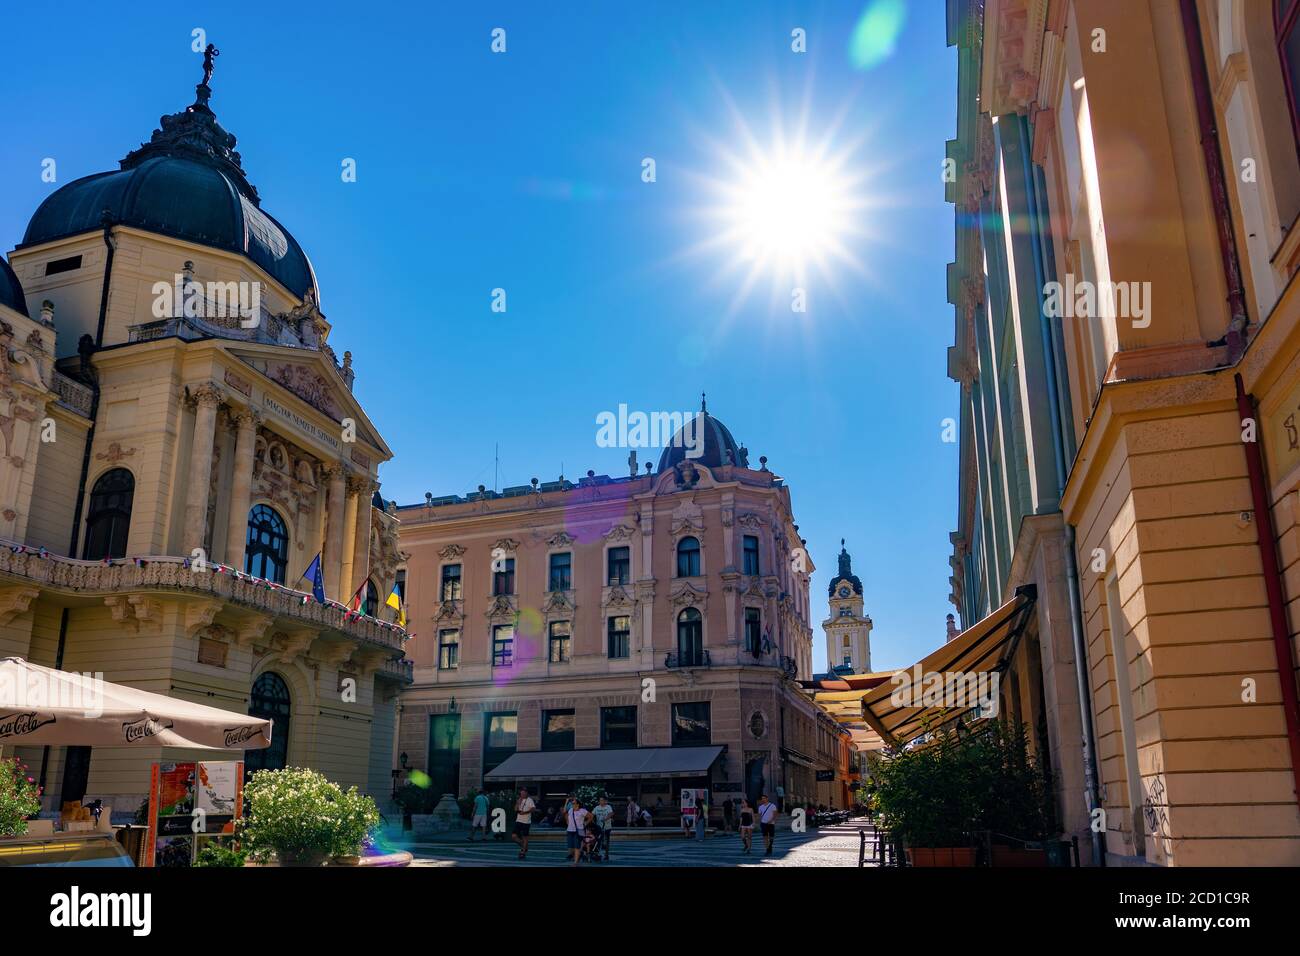 Pecs, Hungary - 08.21. 2020: The National Theater in downtown kiraly street Stock Photo